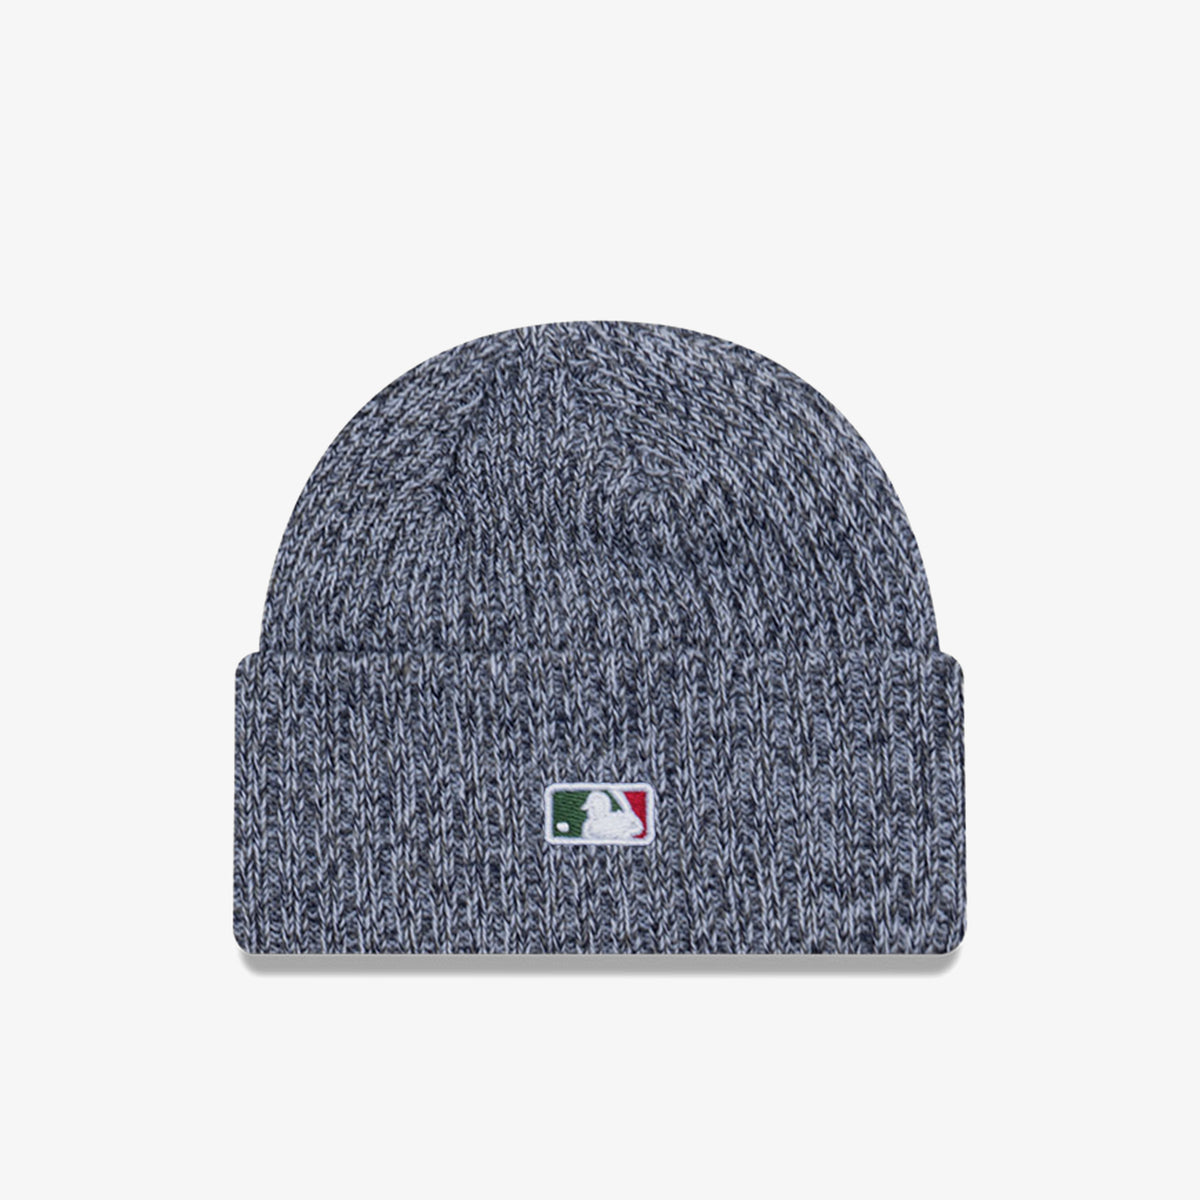 Los Angeles Speckle Knit Beanie - Grey Marle